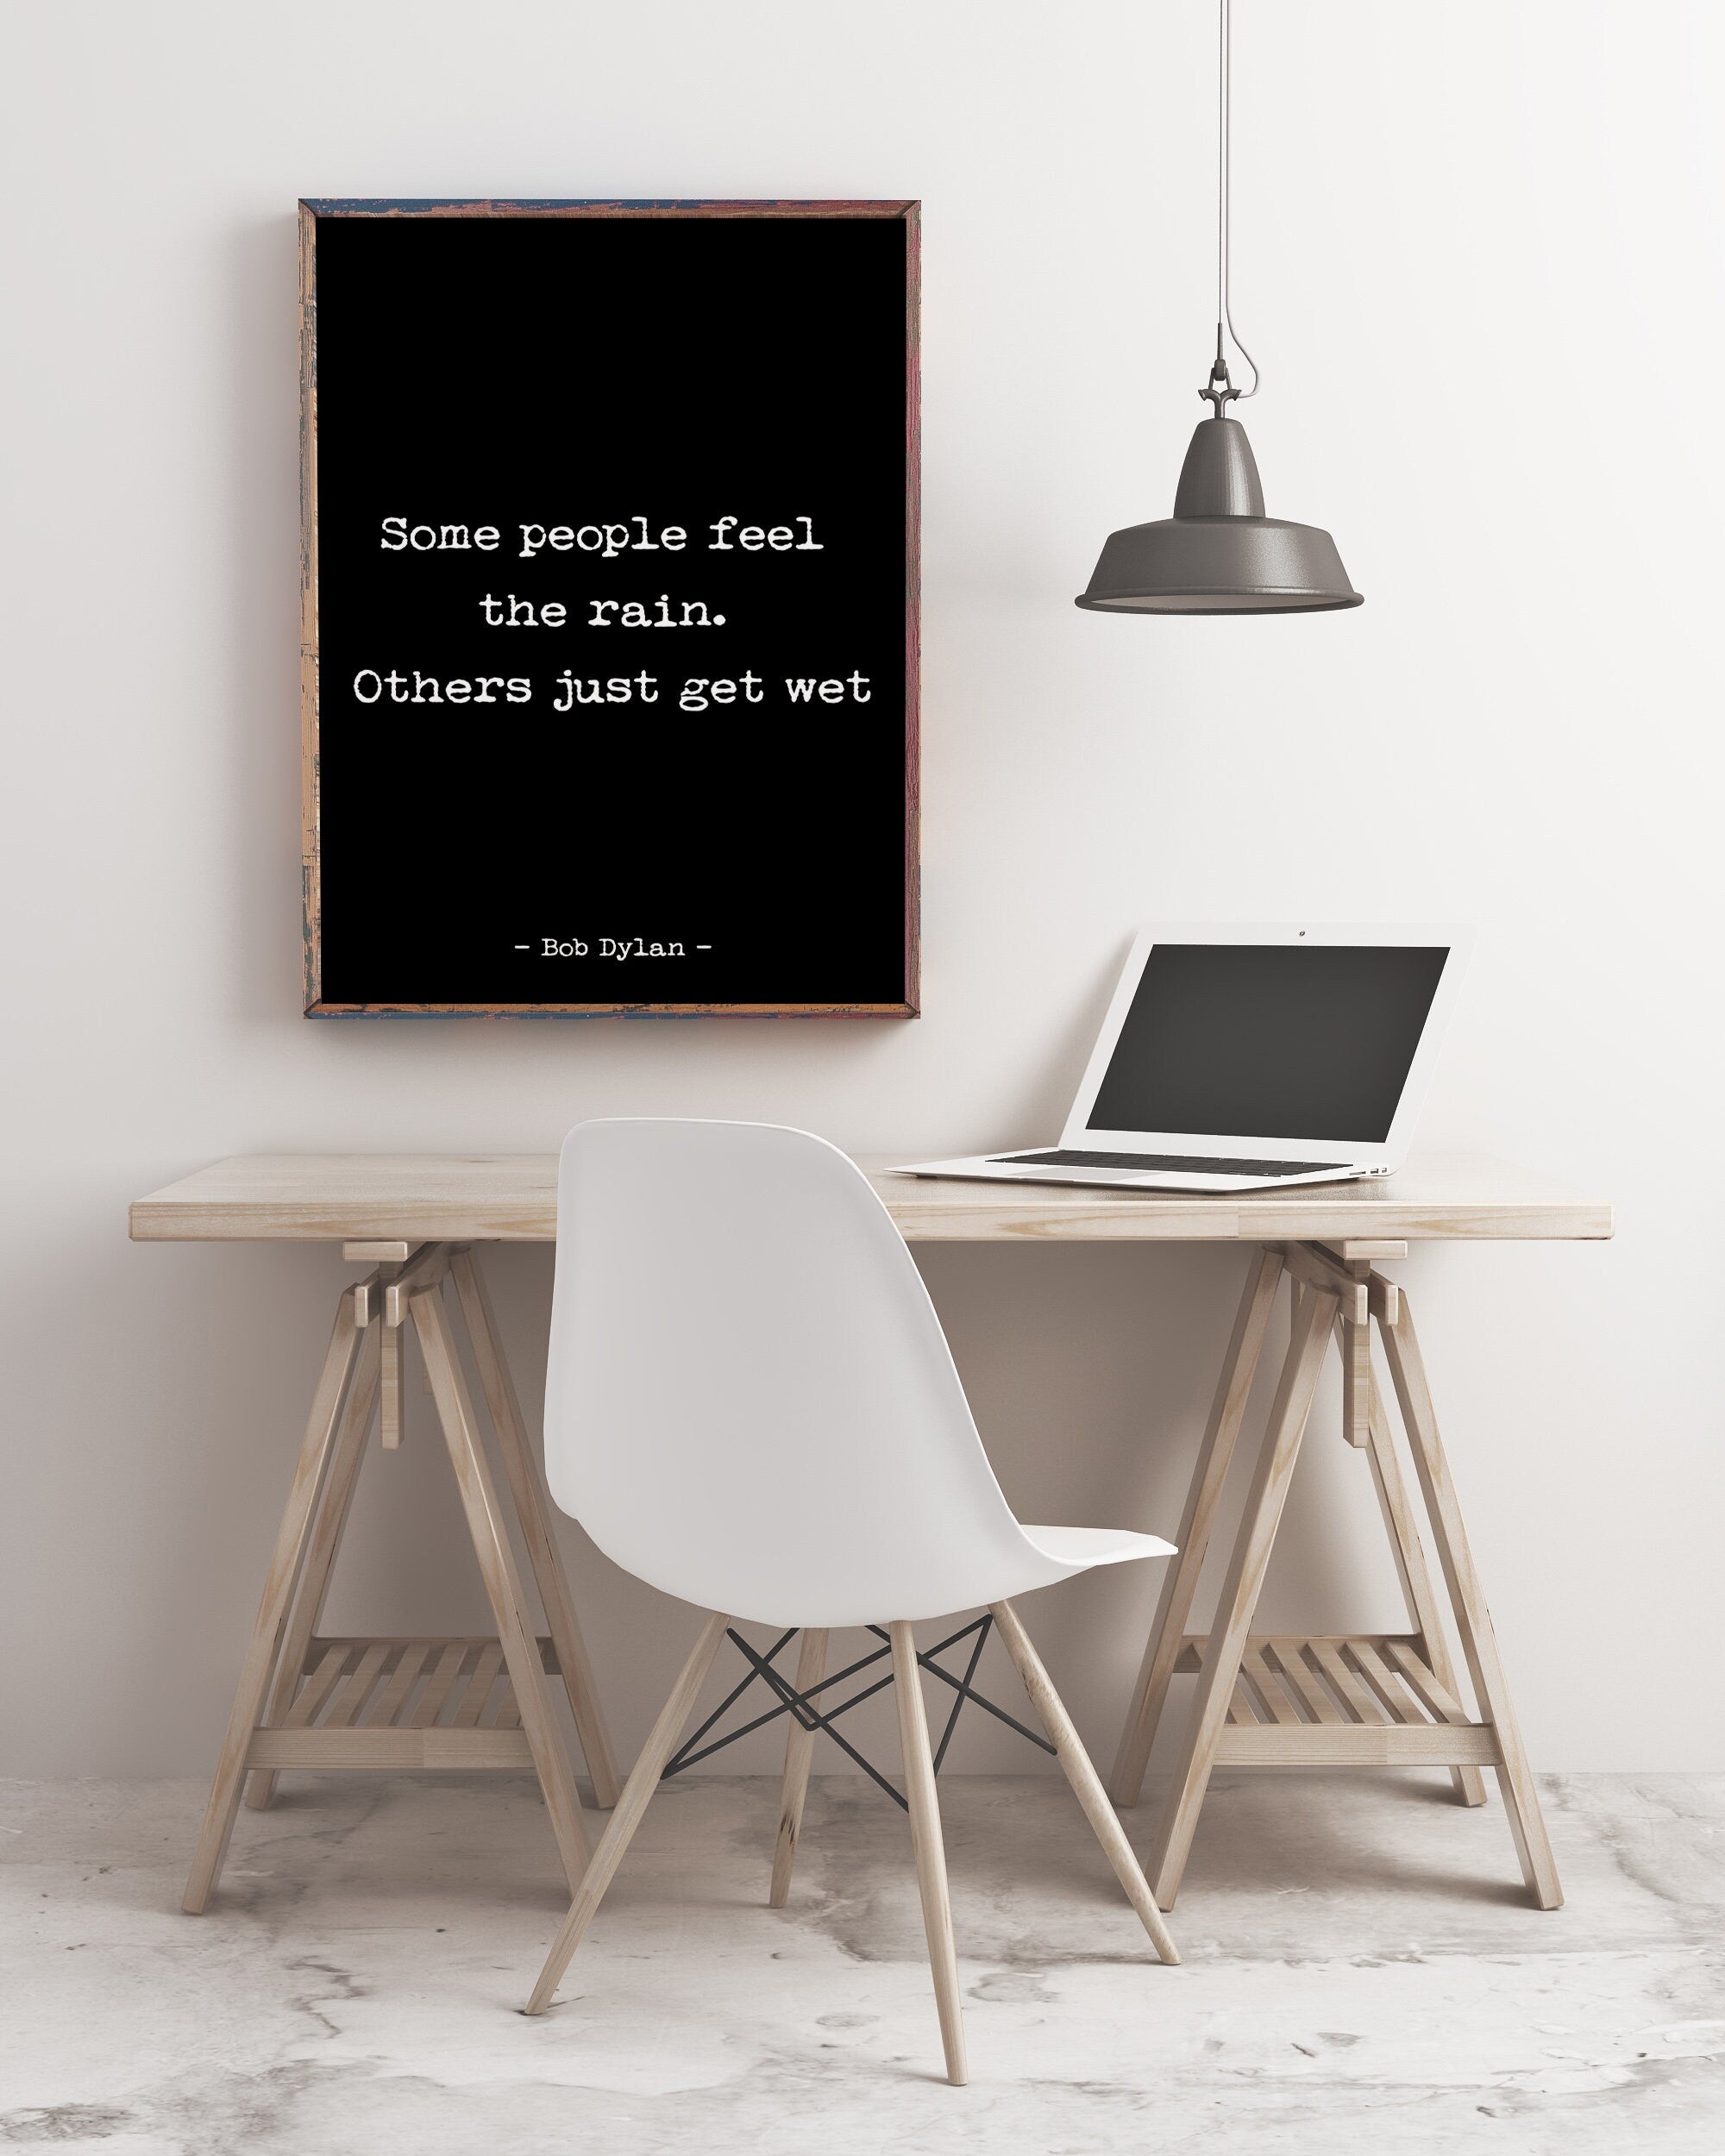 Bob Dylan Quote Print, Some people feel the rain. Others just get wet. Motivational print